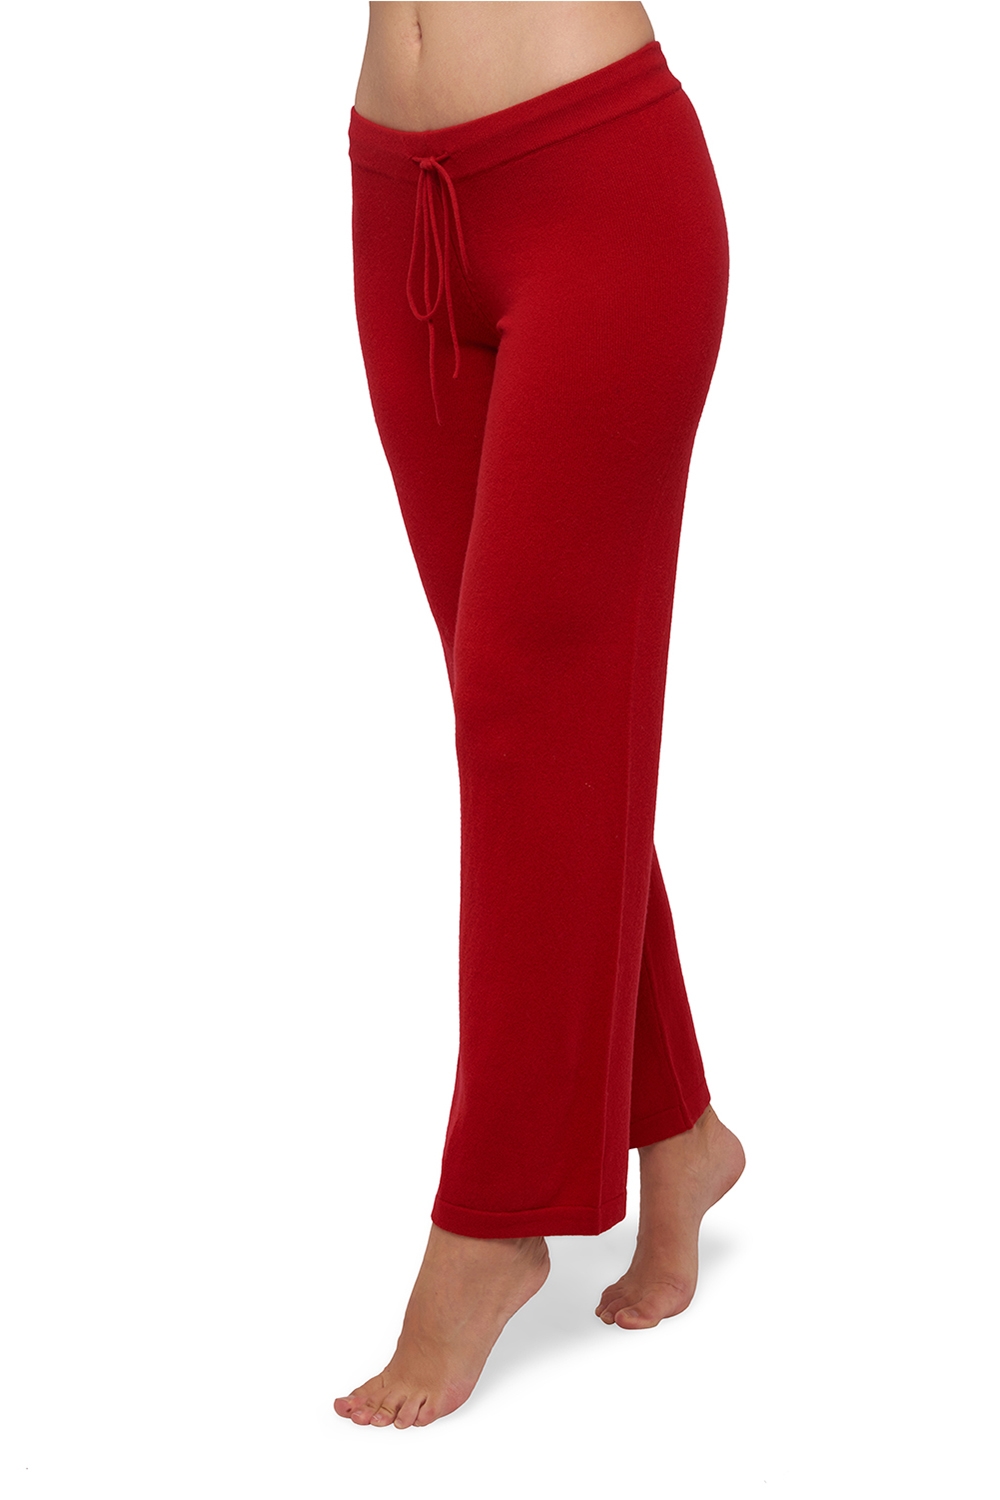 Cashmere ladies timeless classics malice blood red s